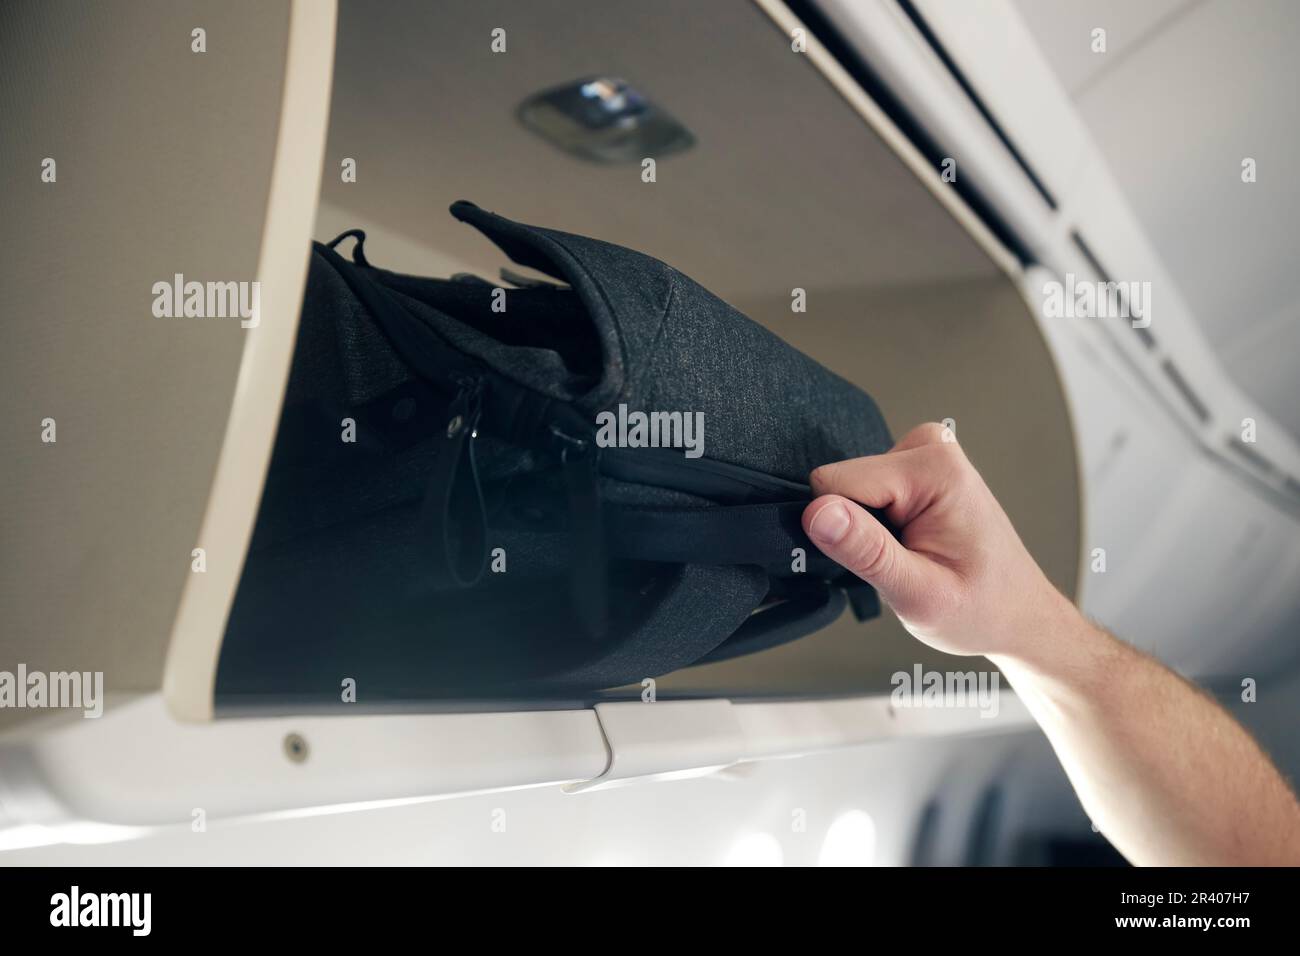 Man travel by plane. Close-up hand of passenger is putting hand baggage in lockers above airplane seats. Stock Photo